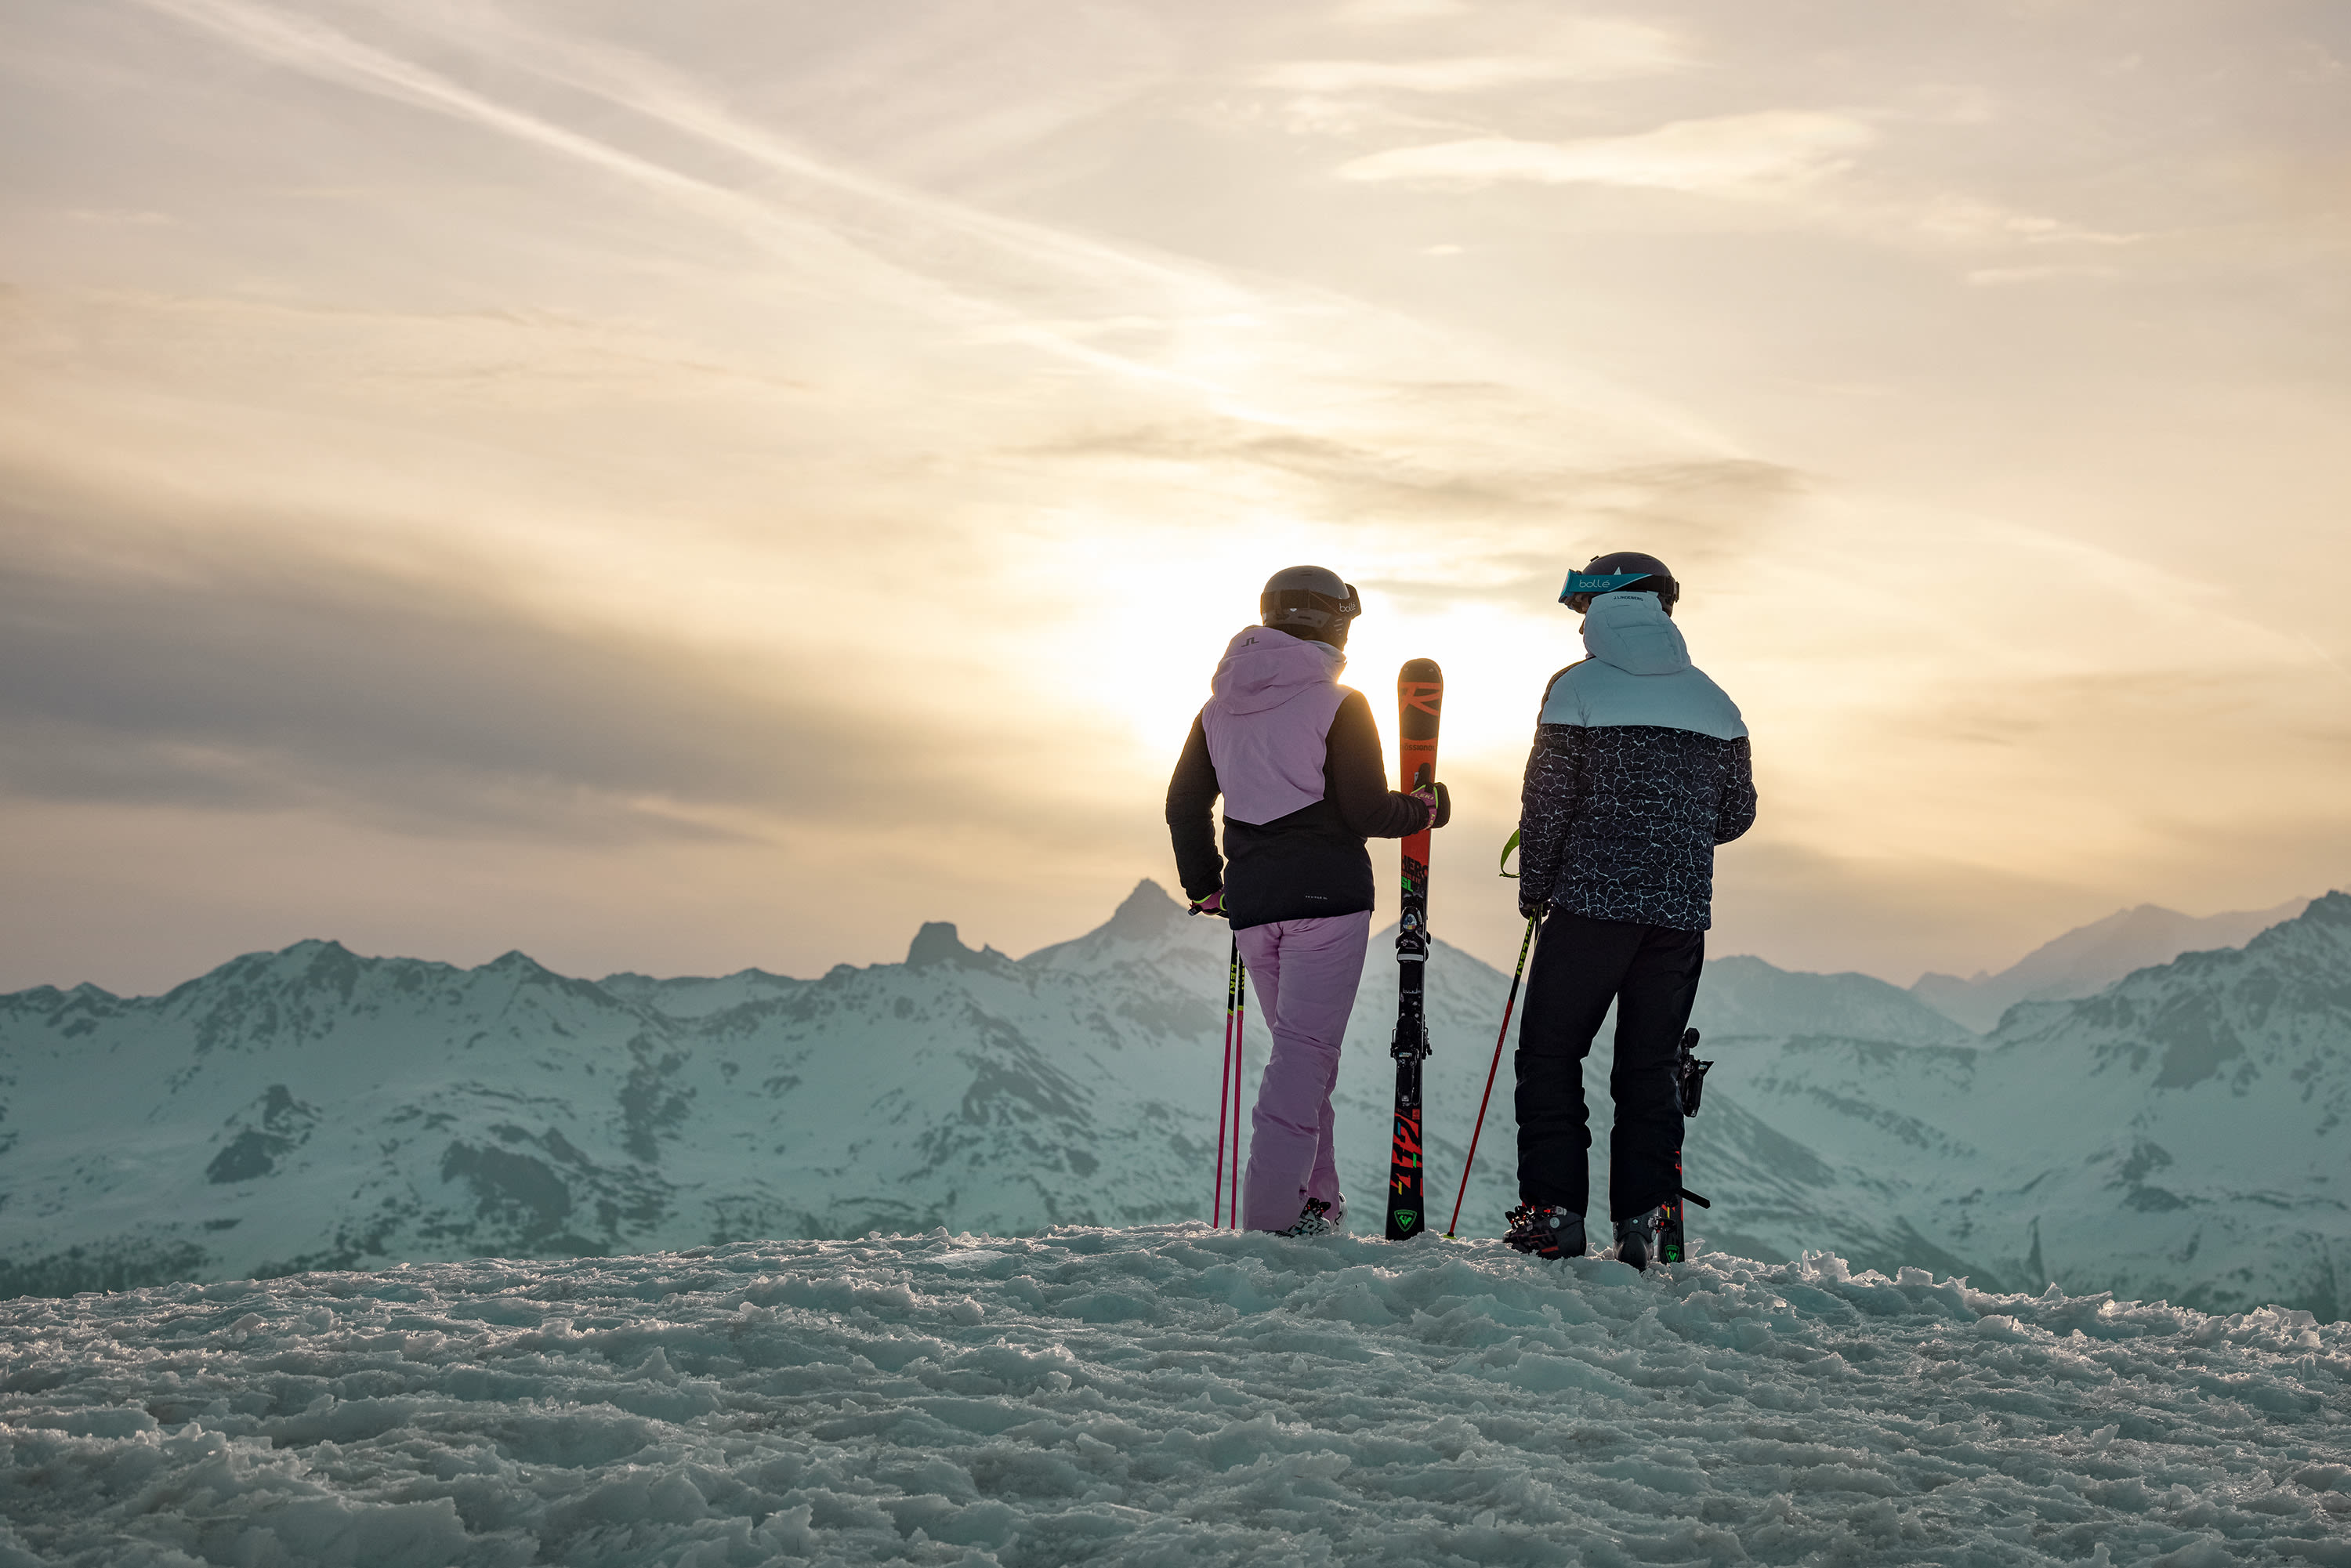 The Meillards admire the sunrise on the slopes of Thyon, Valais.